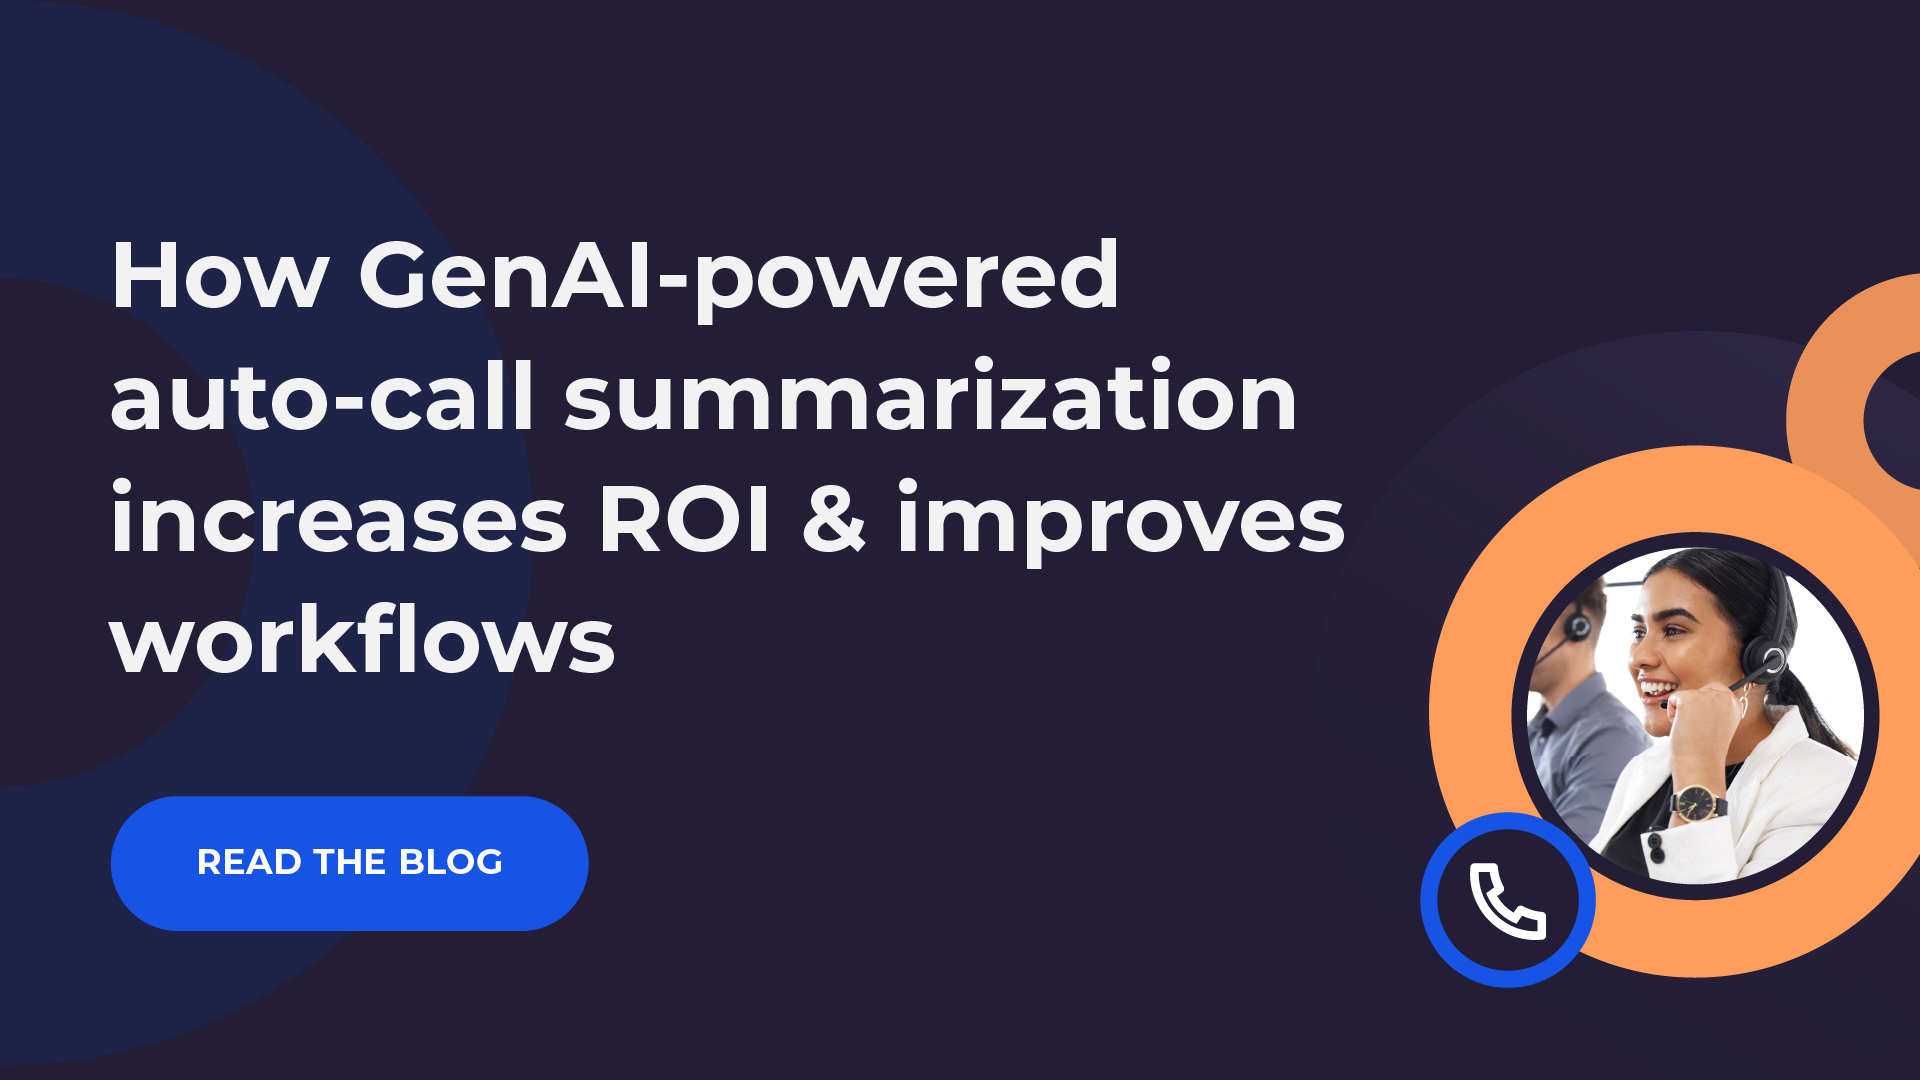 How GenAI-powered auto-call summarization increases ROI and improves workflows